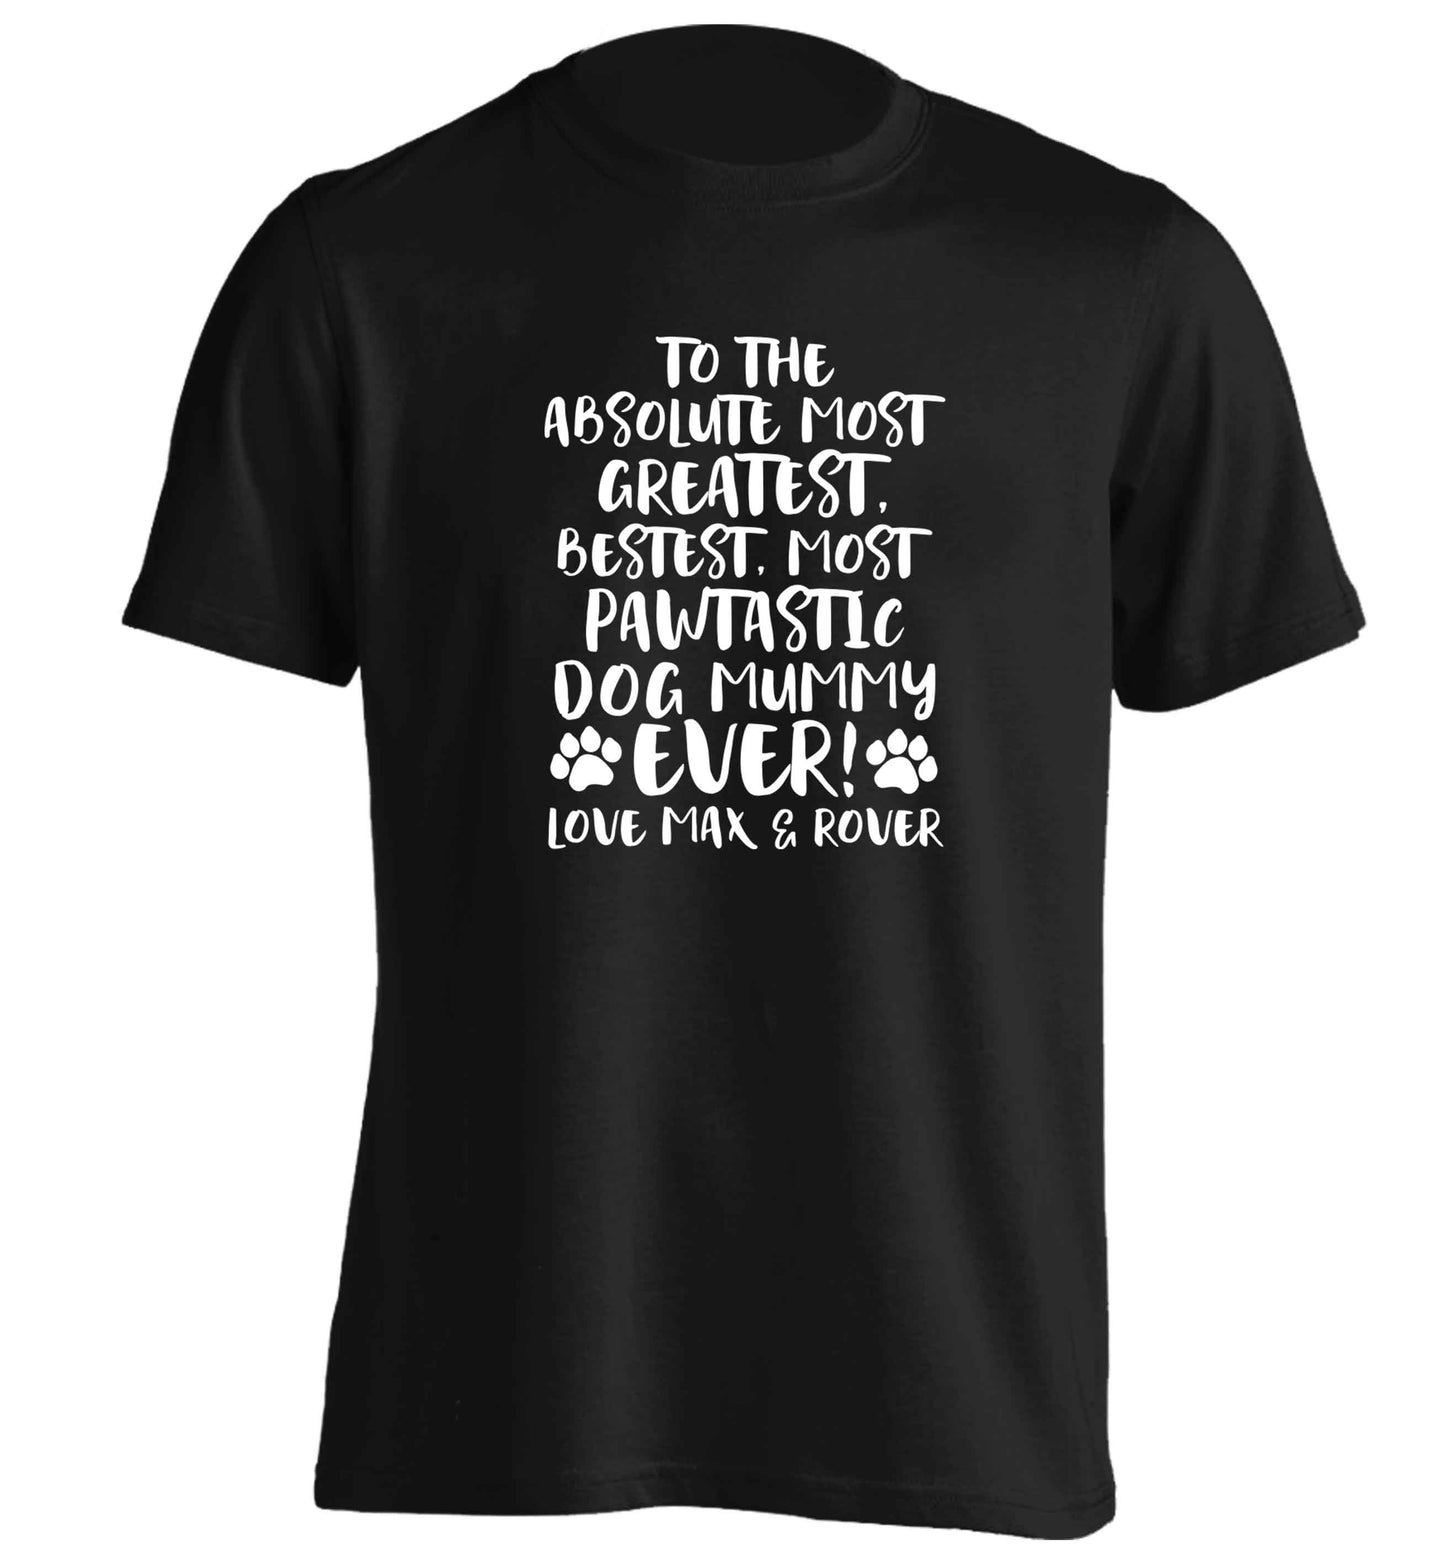 Personalsied to the most pawtastic dog mummy ever adults unisex black Tshirt 2XL